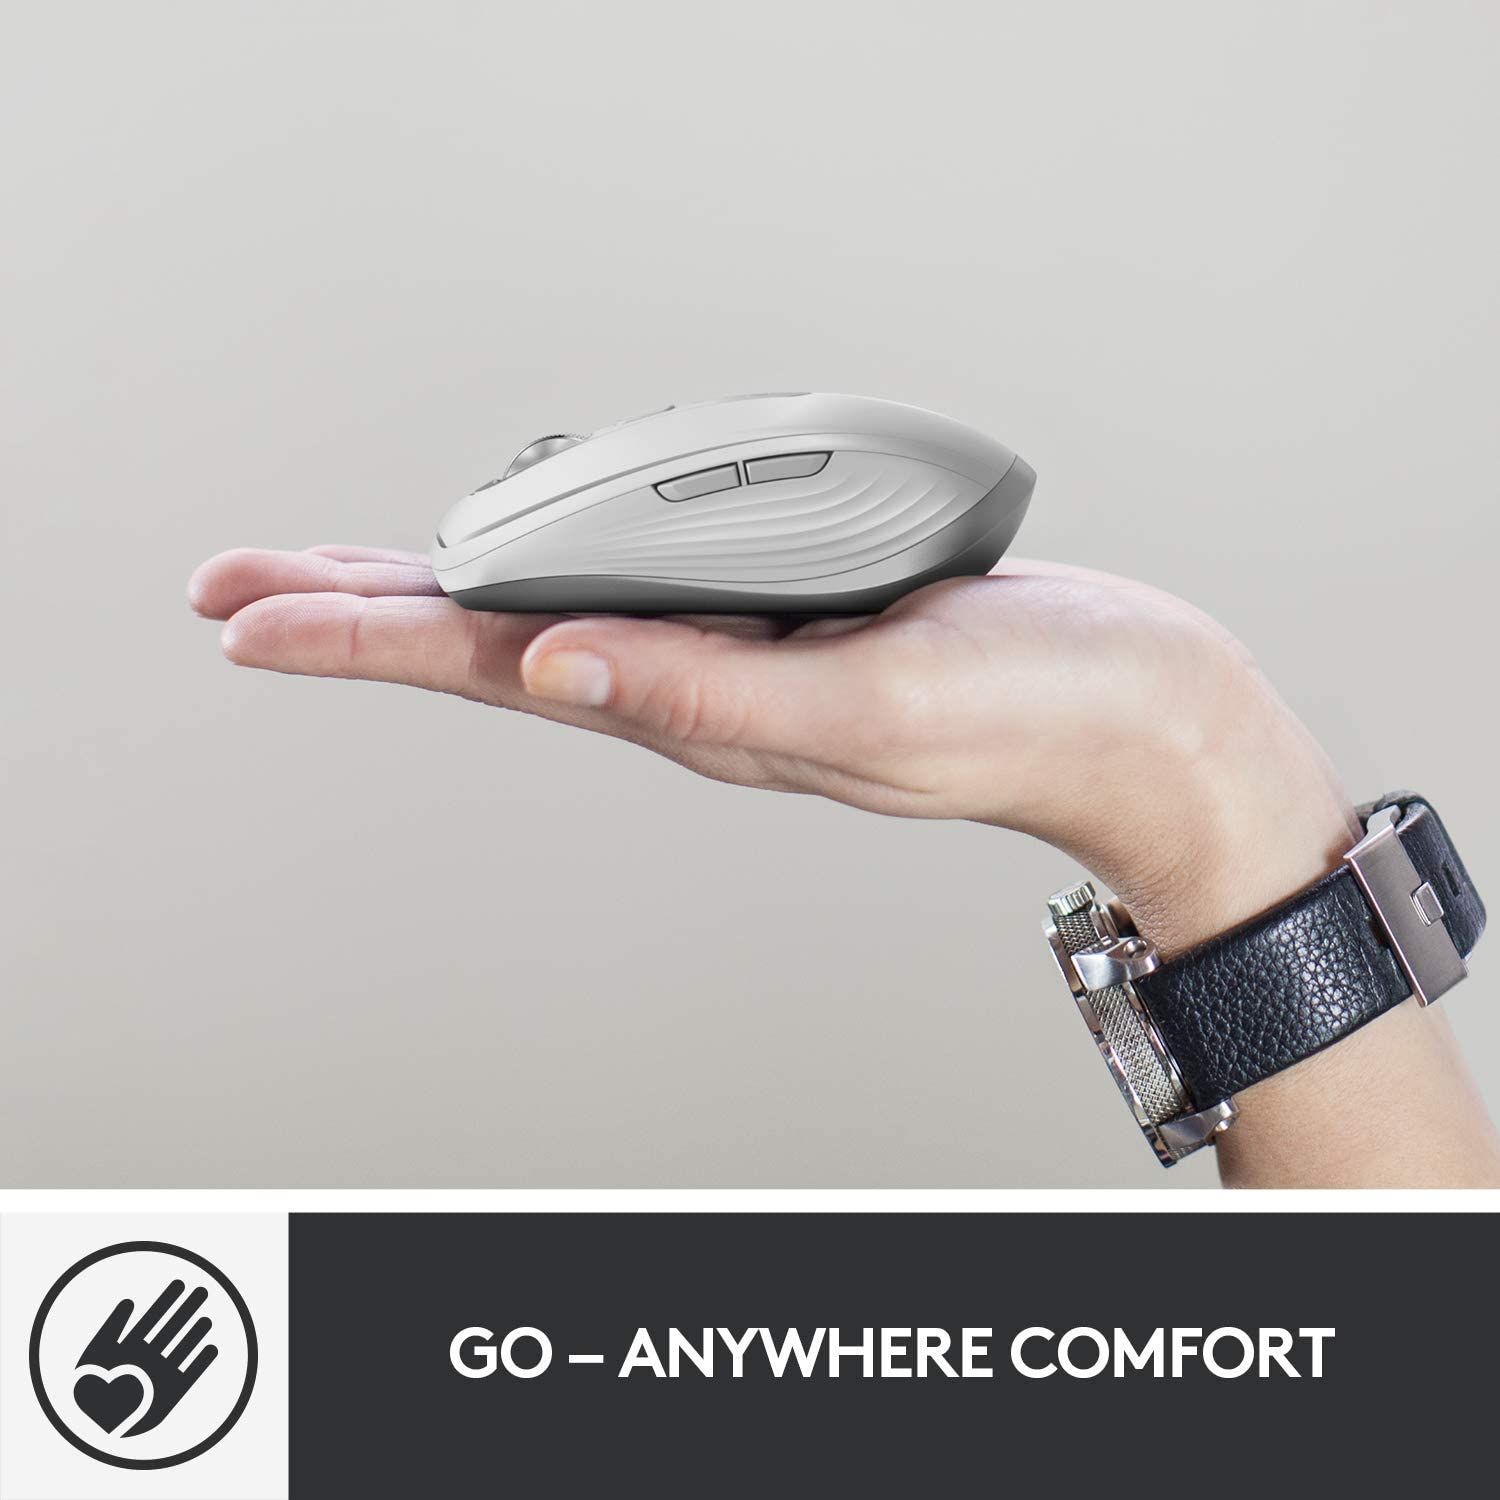  Chuột Vi Tính Không Dây 4000DPI Logitech MX Anywhere 3 for Mac Compact Performance Mouse,Wireless, Comfortable, Ultrafast Scrolling, Any Surface, Portable, 4000DPI, Customizable Buttons, USB-C 